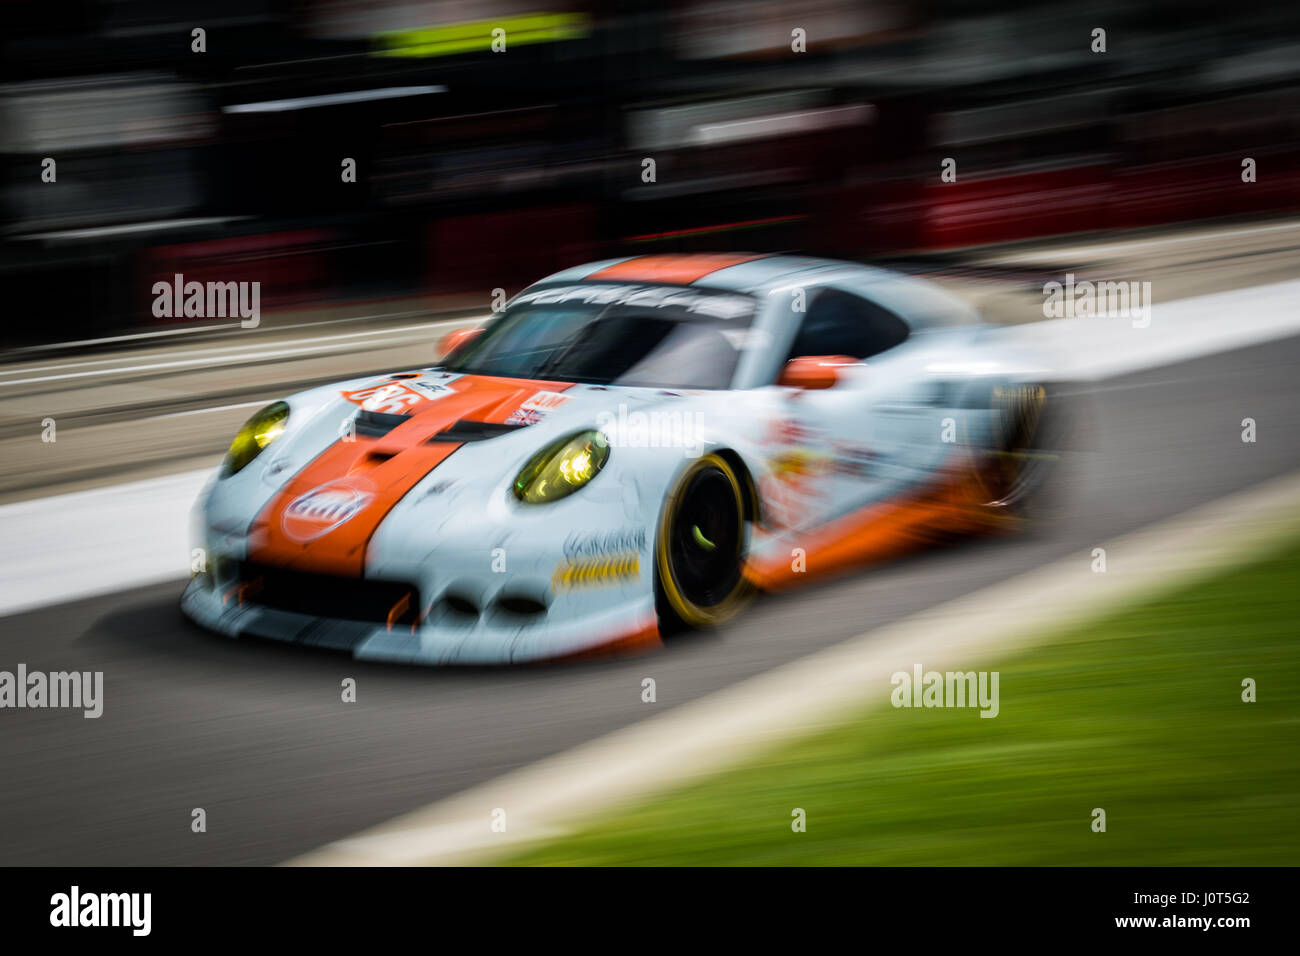 Towcester, Northamptonshire, UK. 16th Apr, 2017. FIA WEC racing team Gulf Racing during the 6 Hours of Silverstone of the FIA World Endurance Championship Autograph session at Silverstone Circuit Credit: Gergo Toth/Alamy Live News Stock Photo